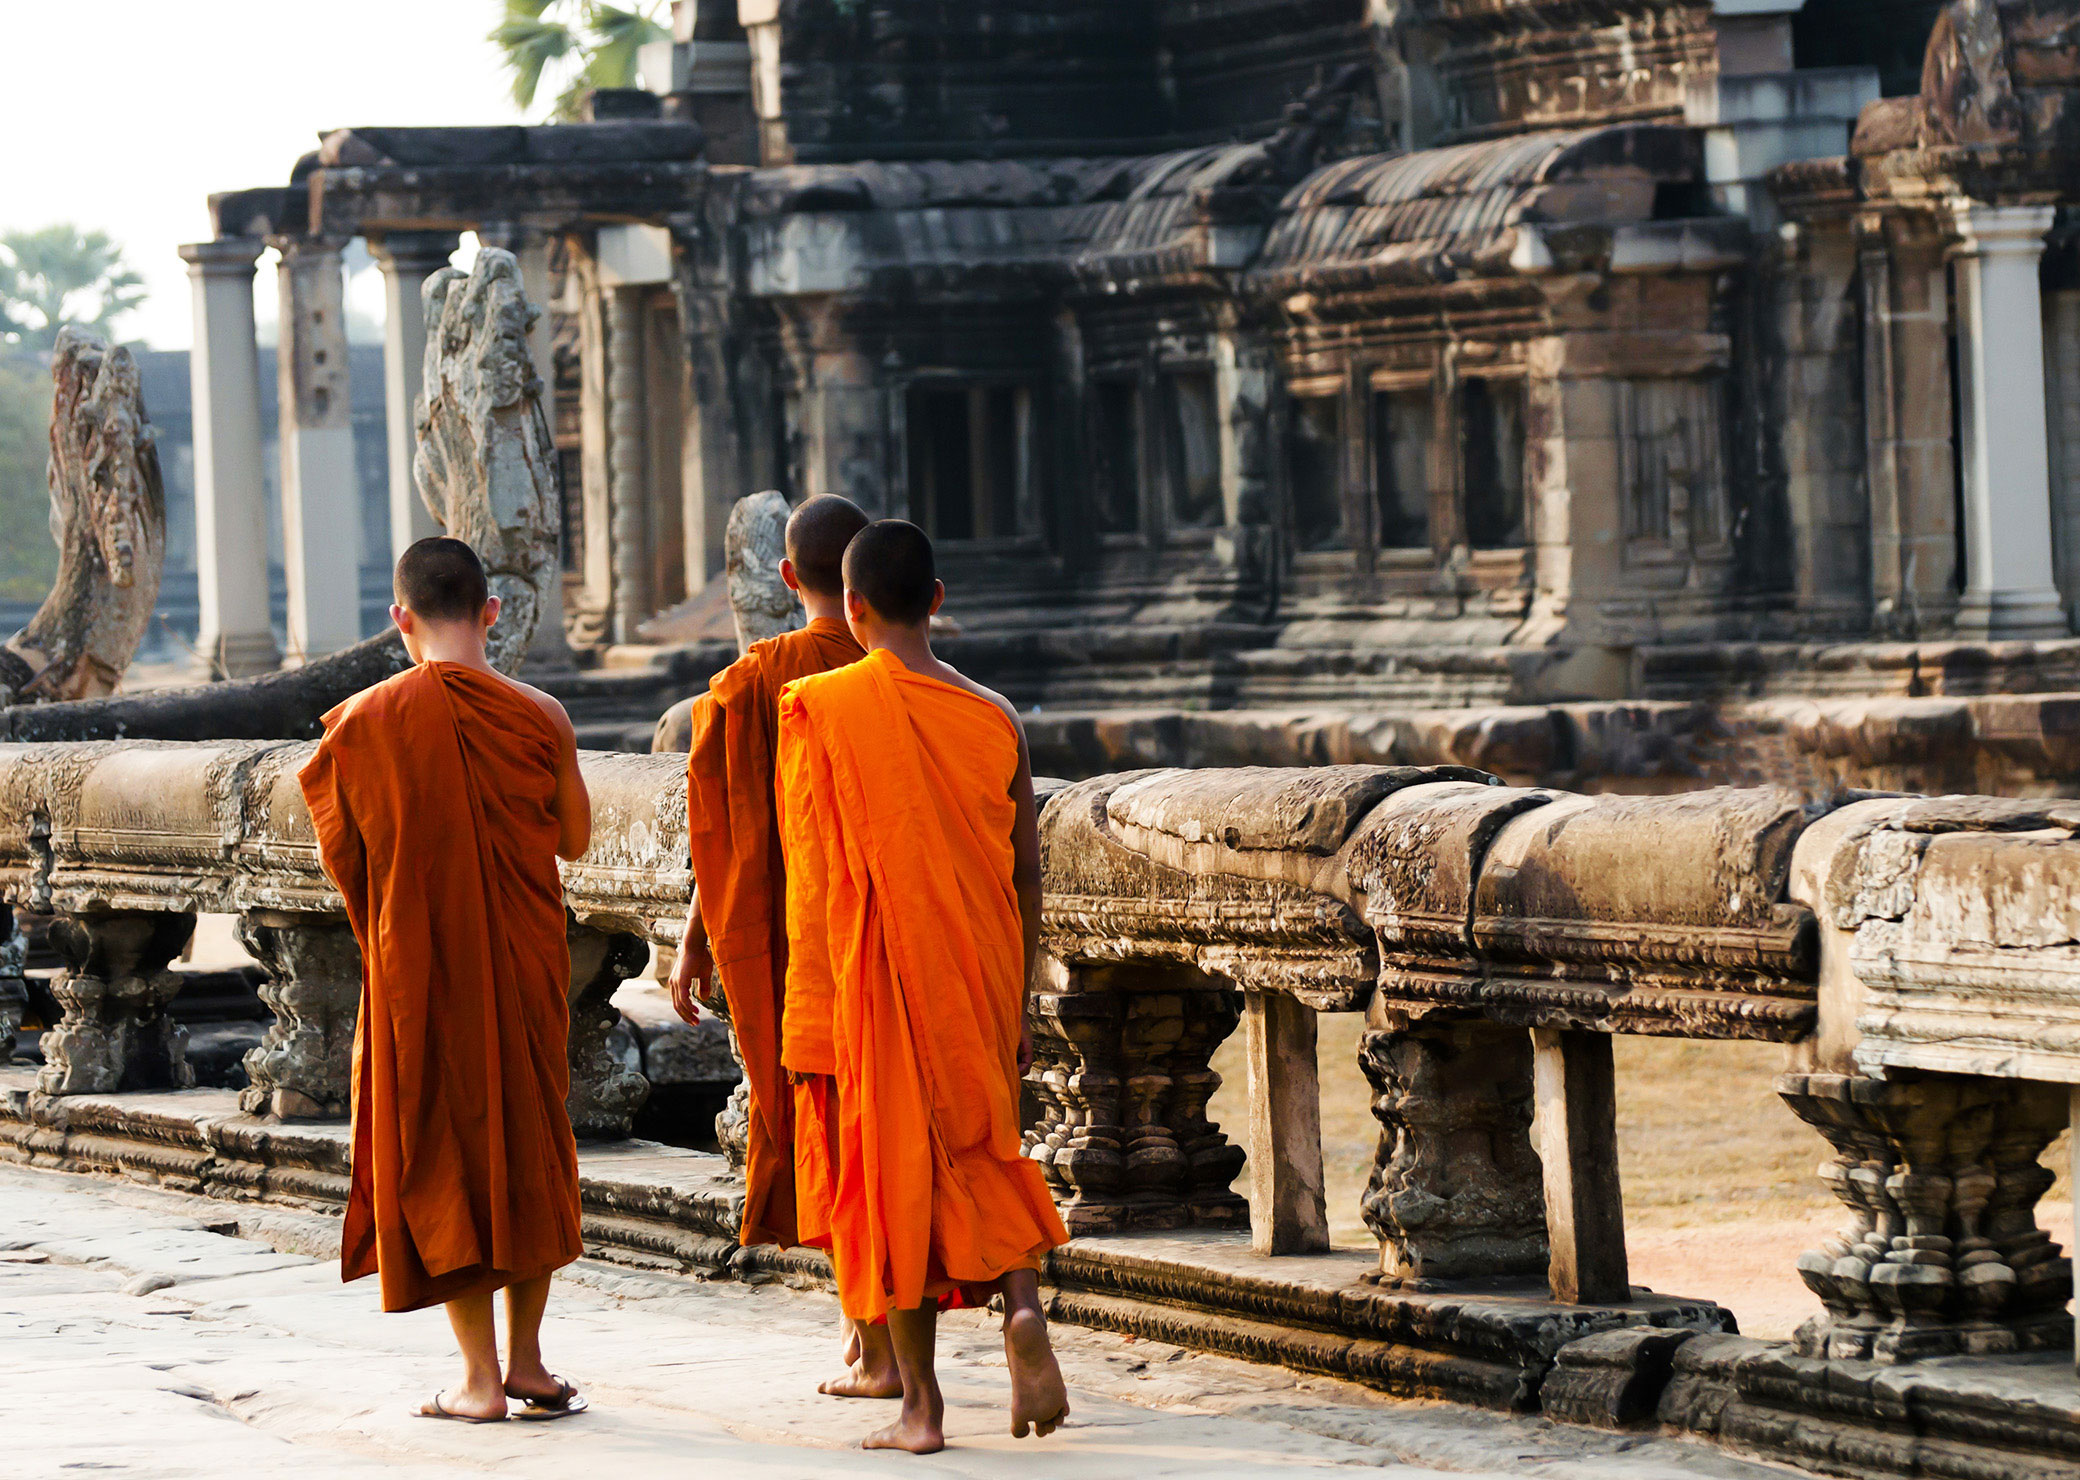 Monks at a temple in Laos